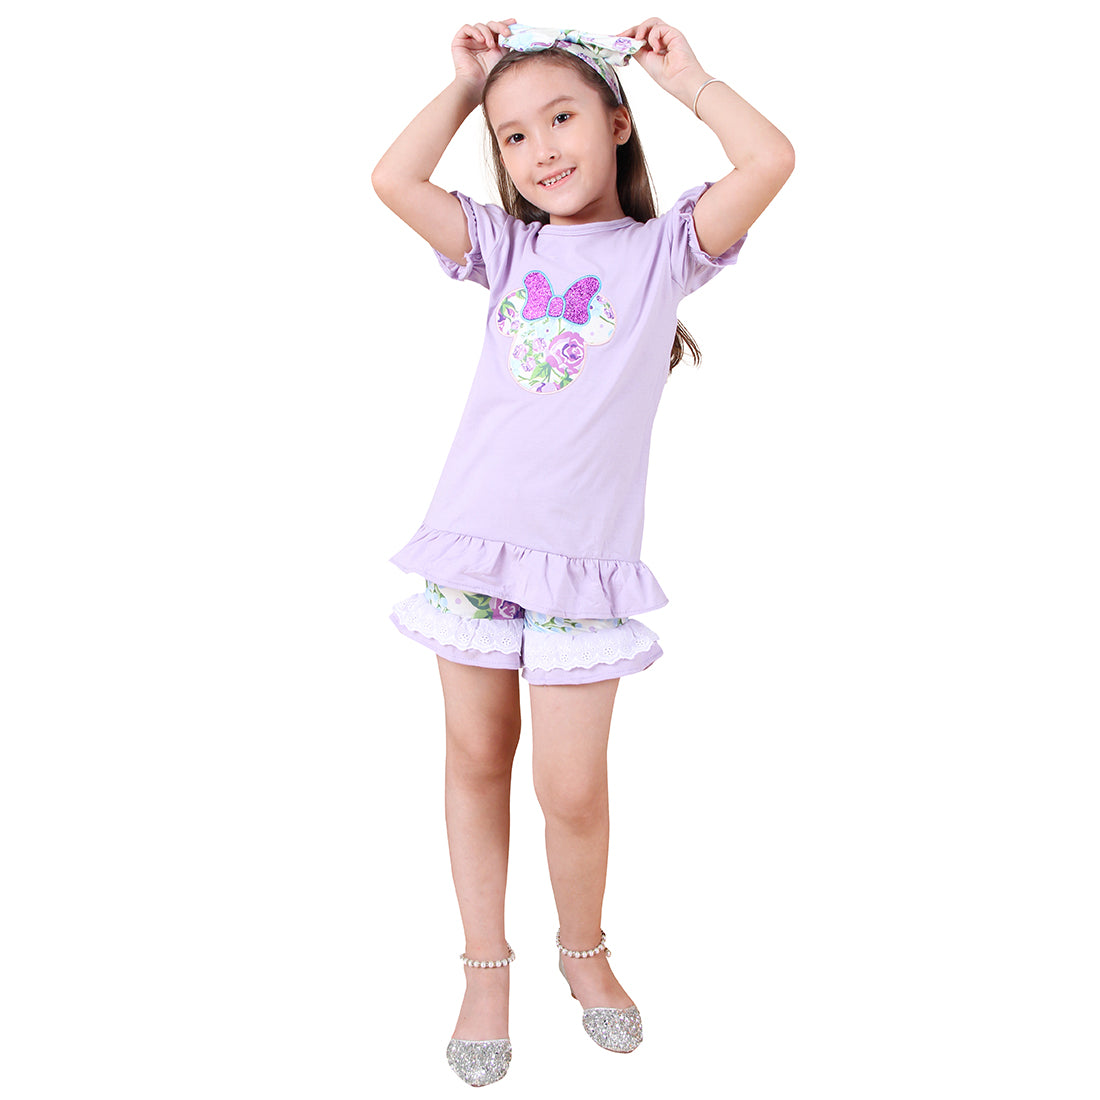 Baby Toddler Little Girls Disney Inspired Minnie Mouse Head Top Shorts Set - Lavender - Angeline Kids